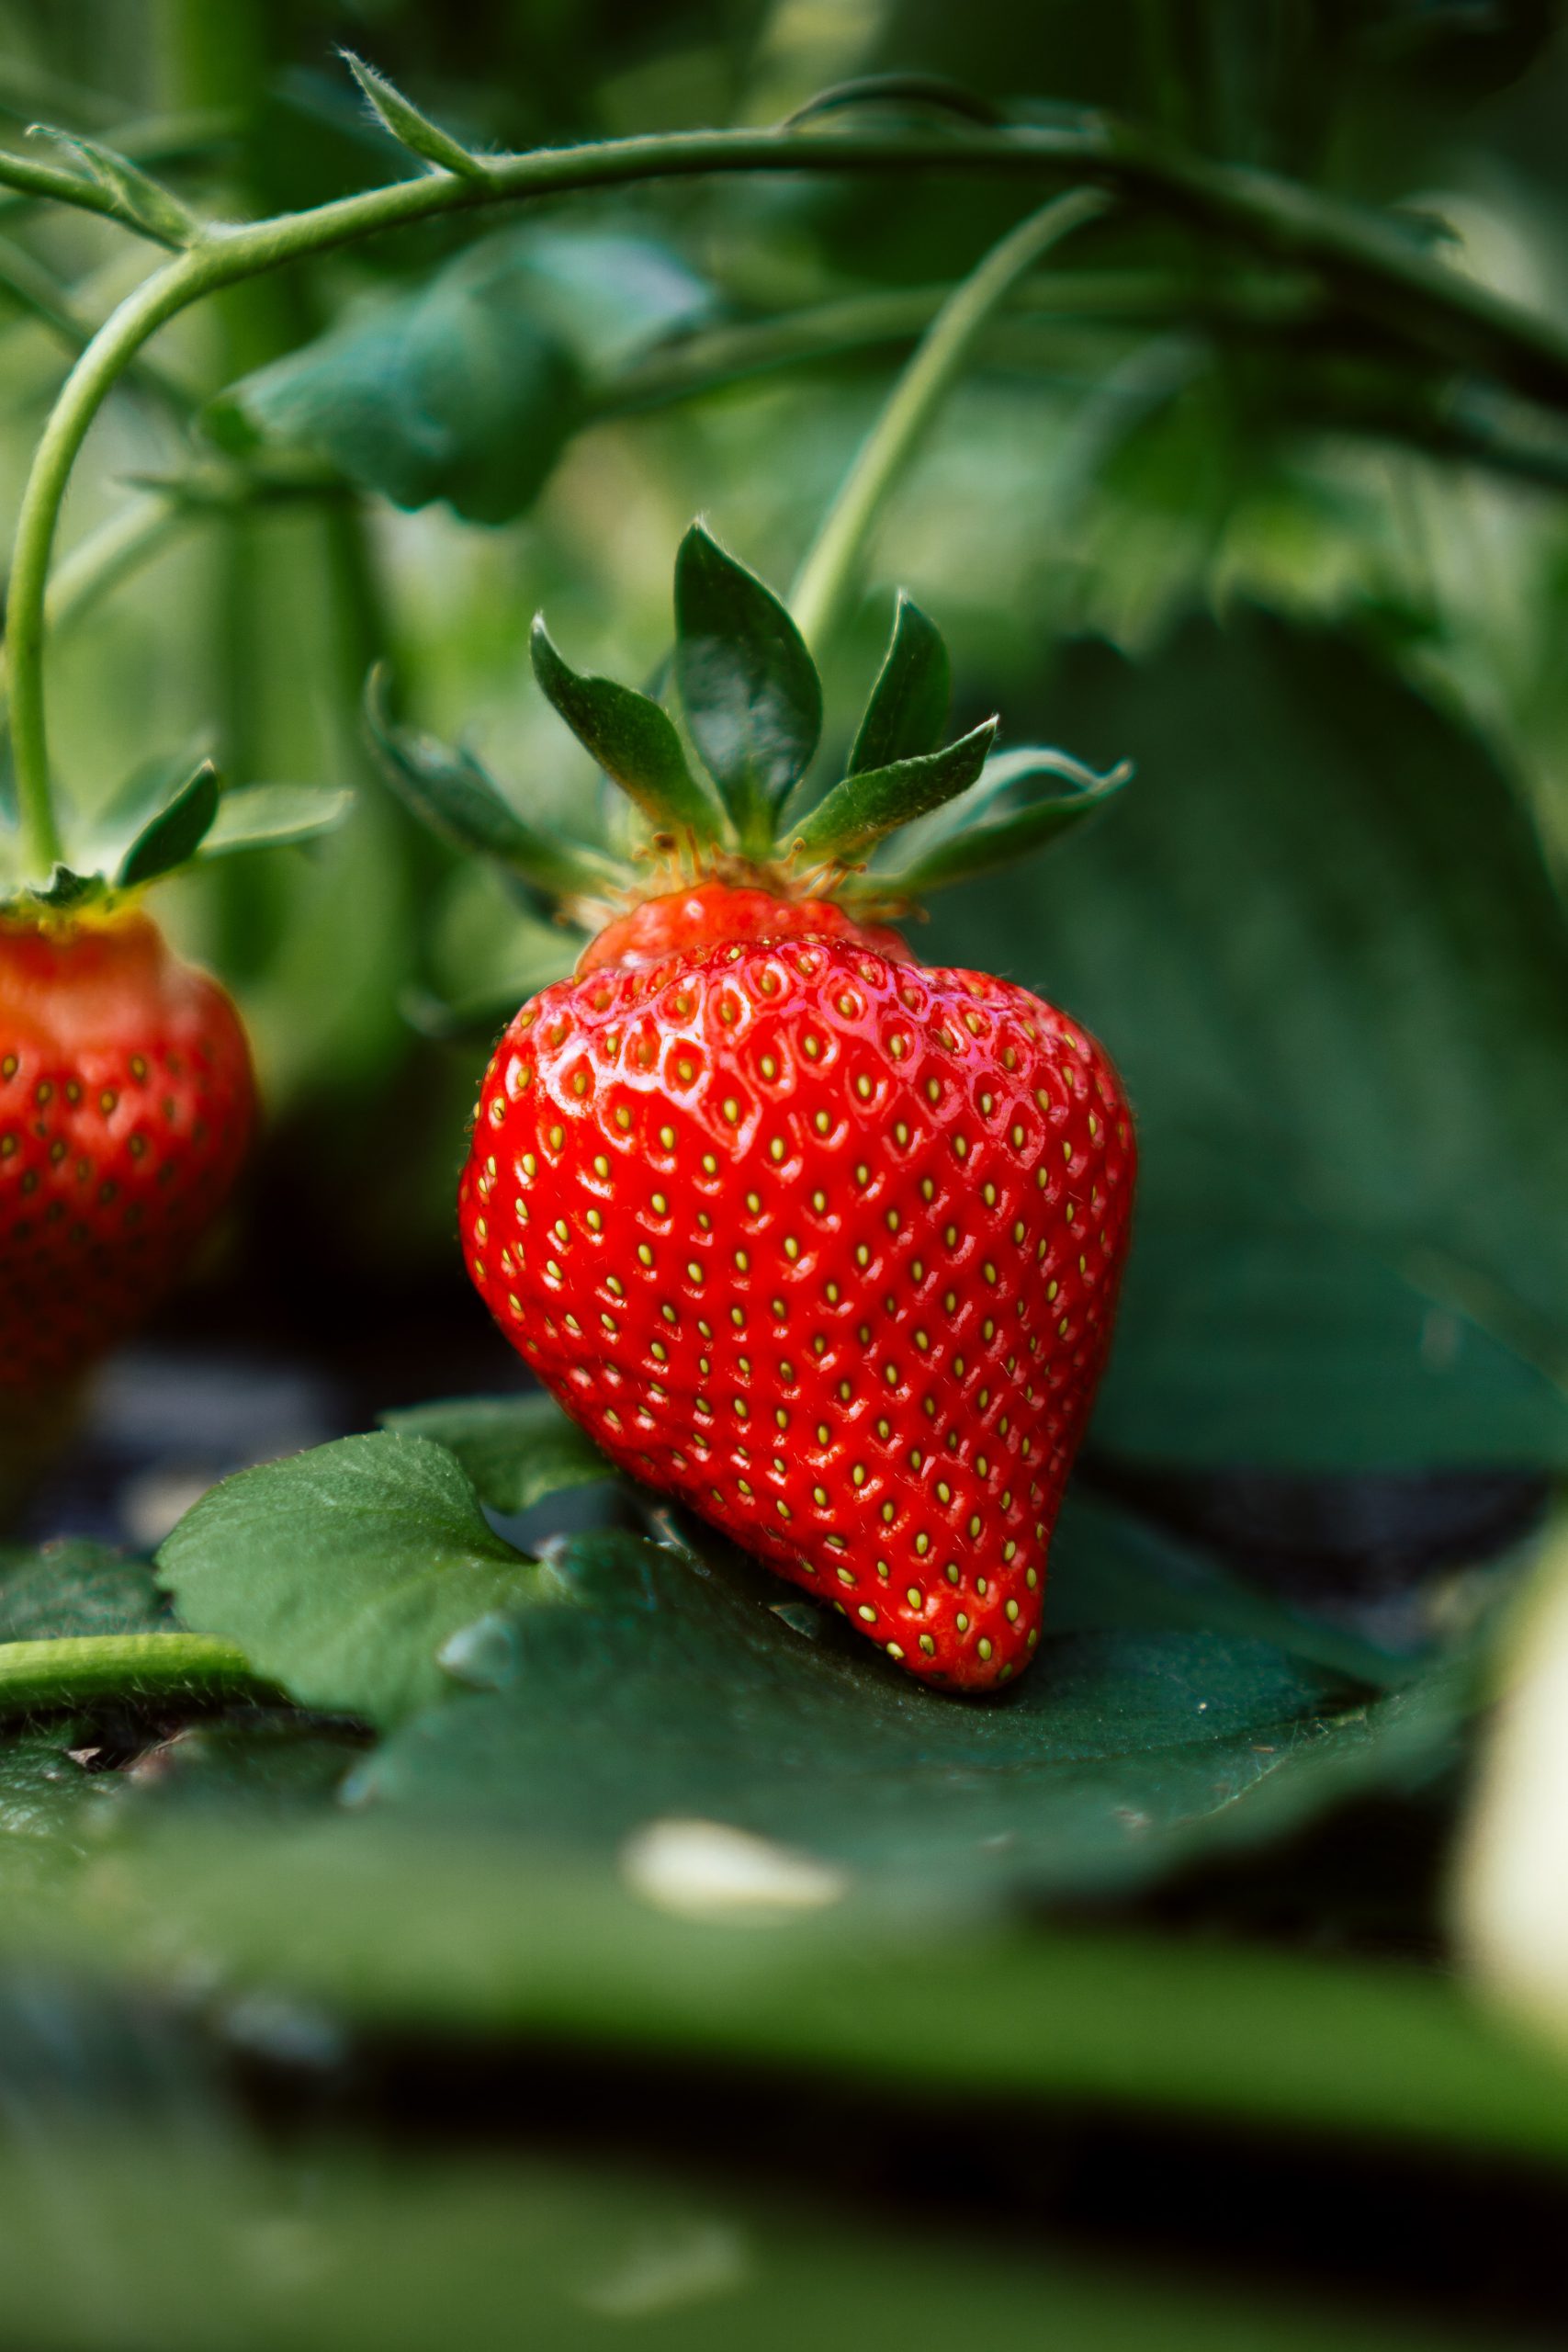 Can You Compost Strawberries?